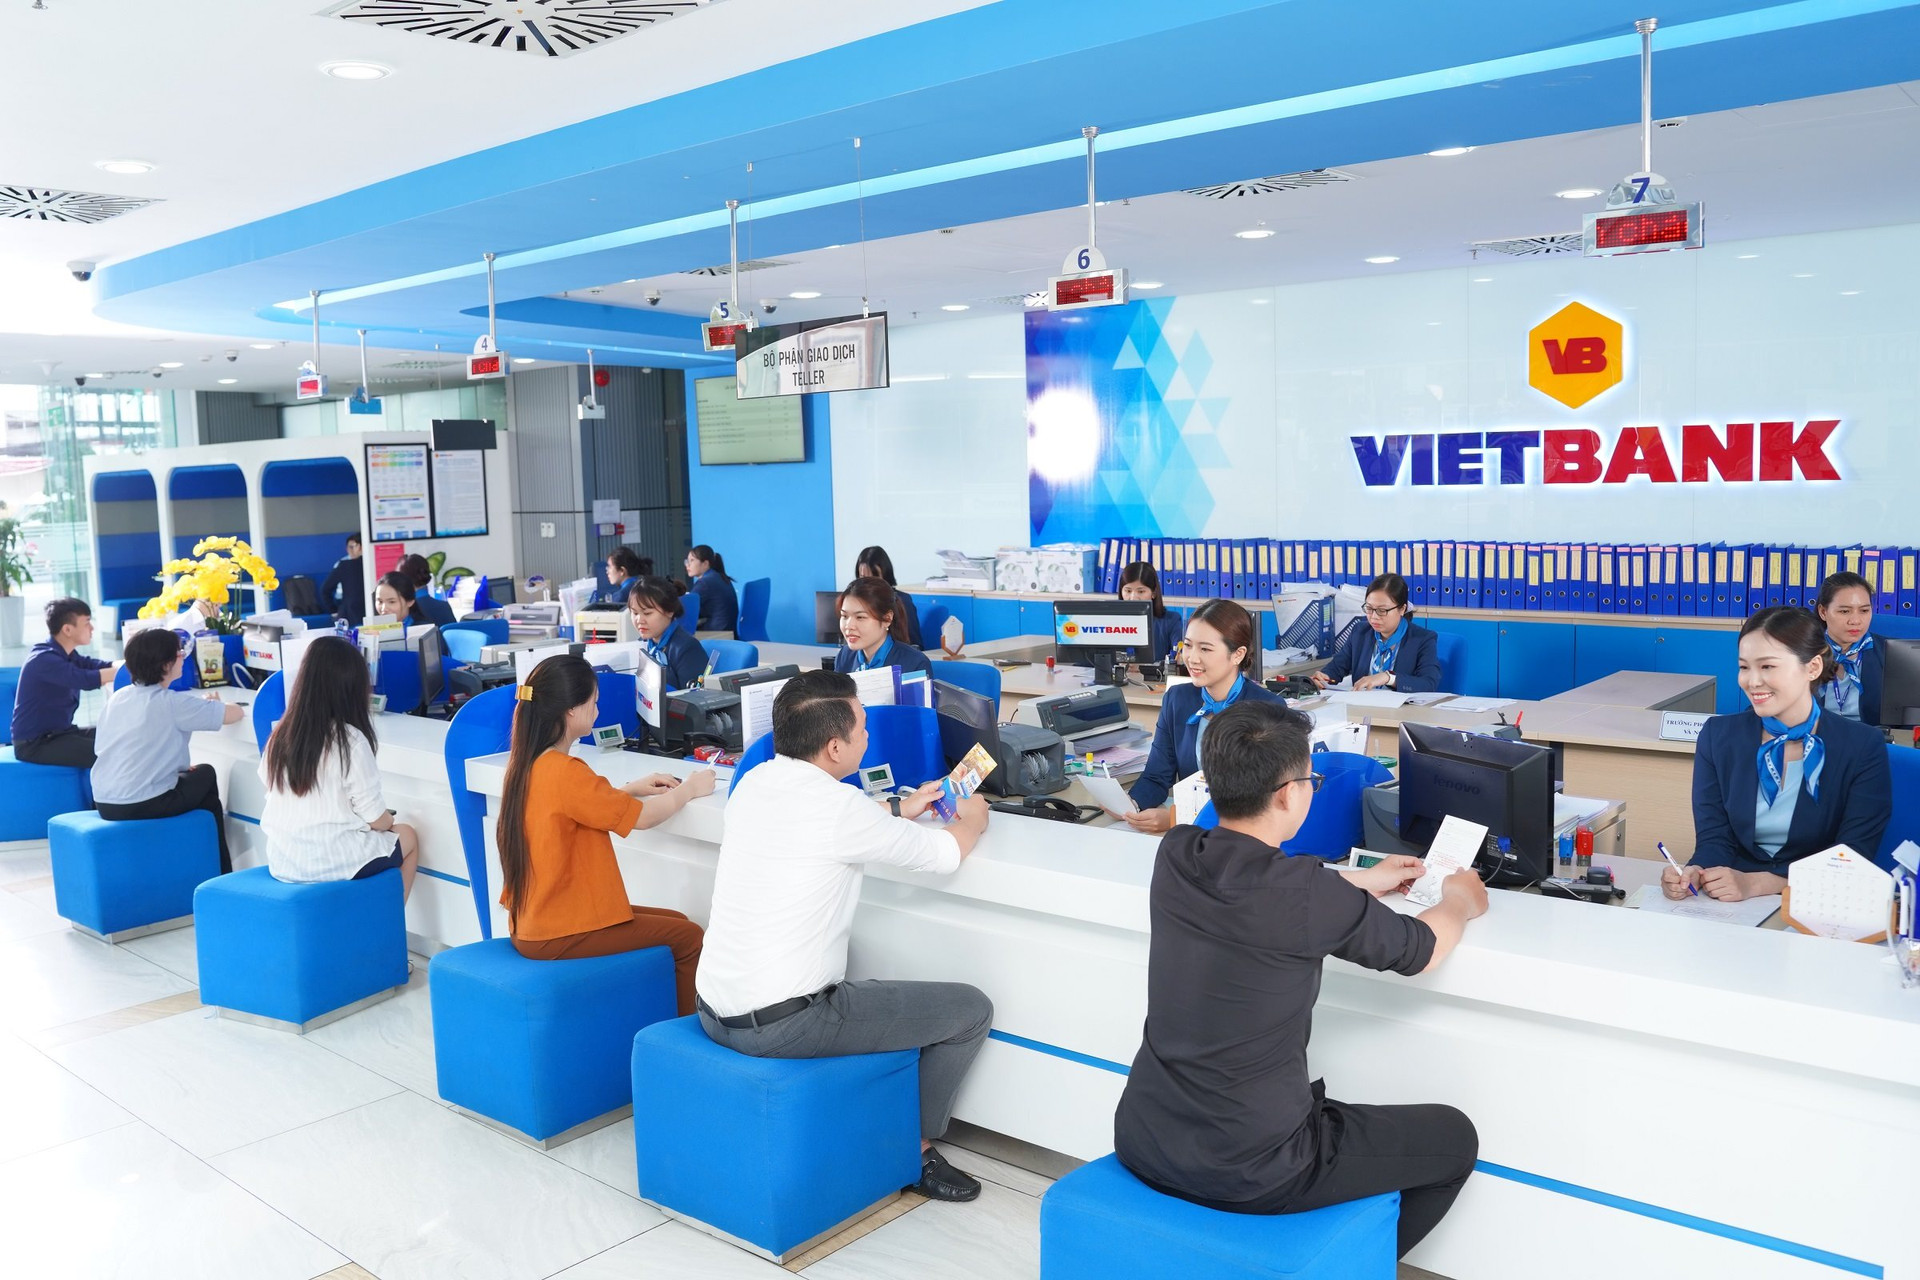 hinh-canh-giao-dich-vietbank.jpg